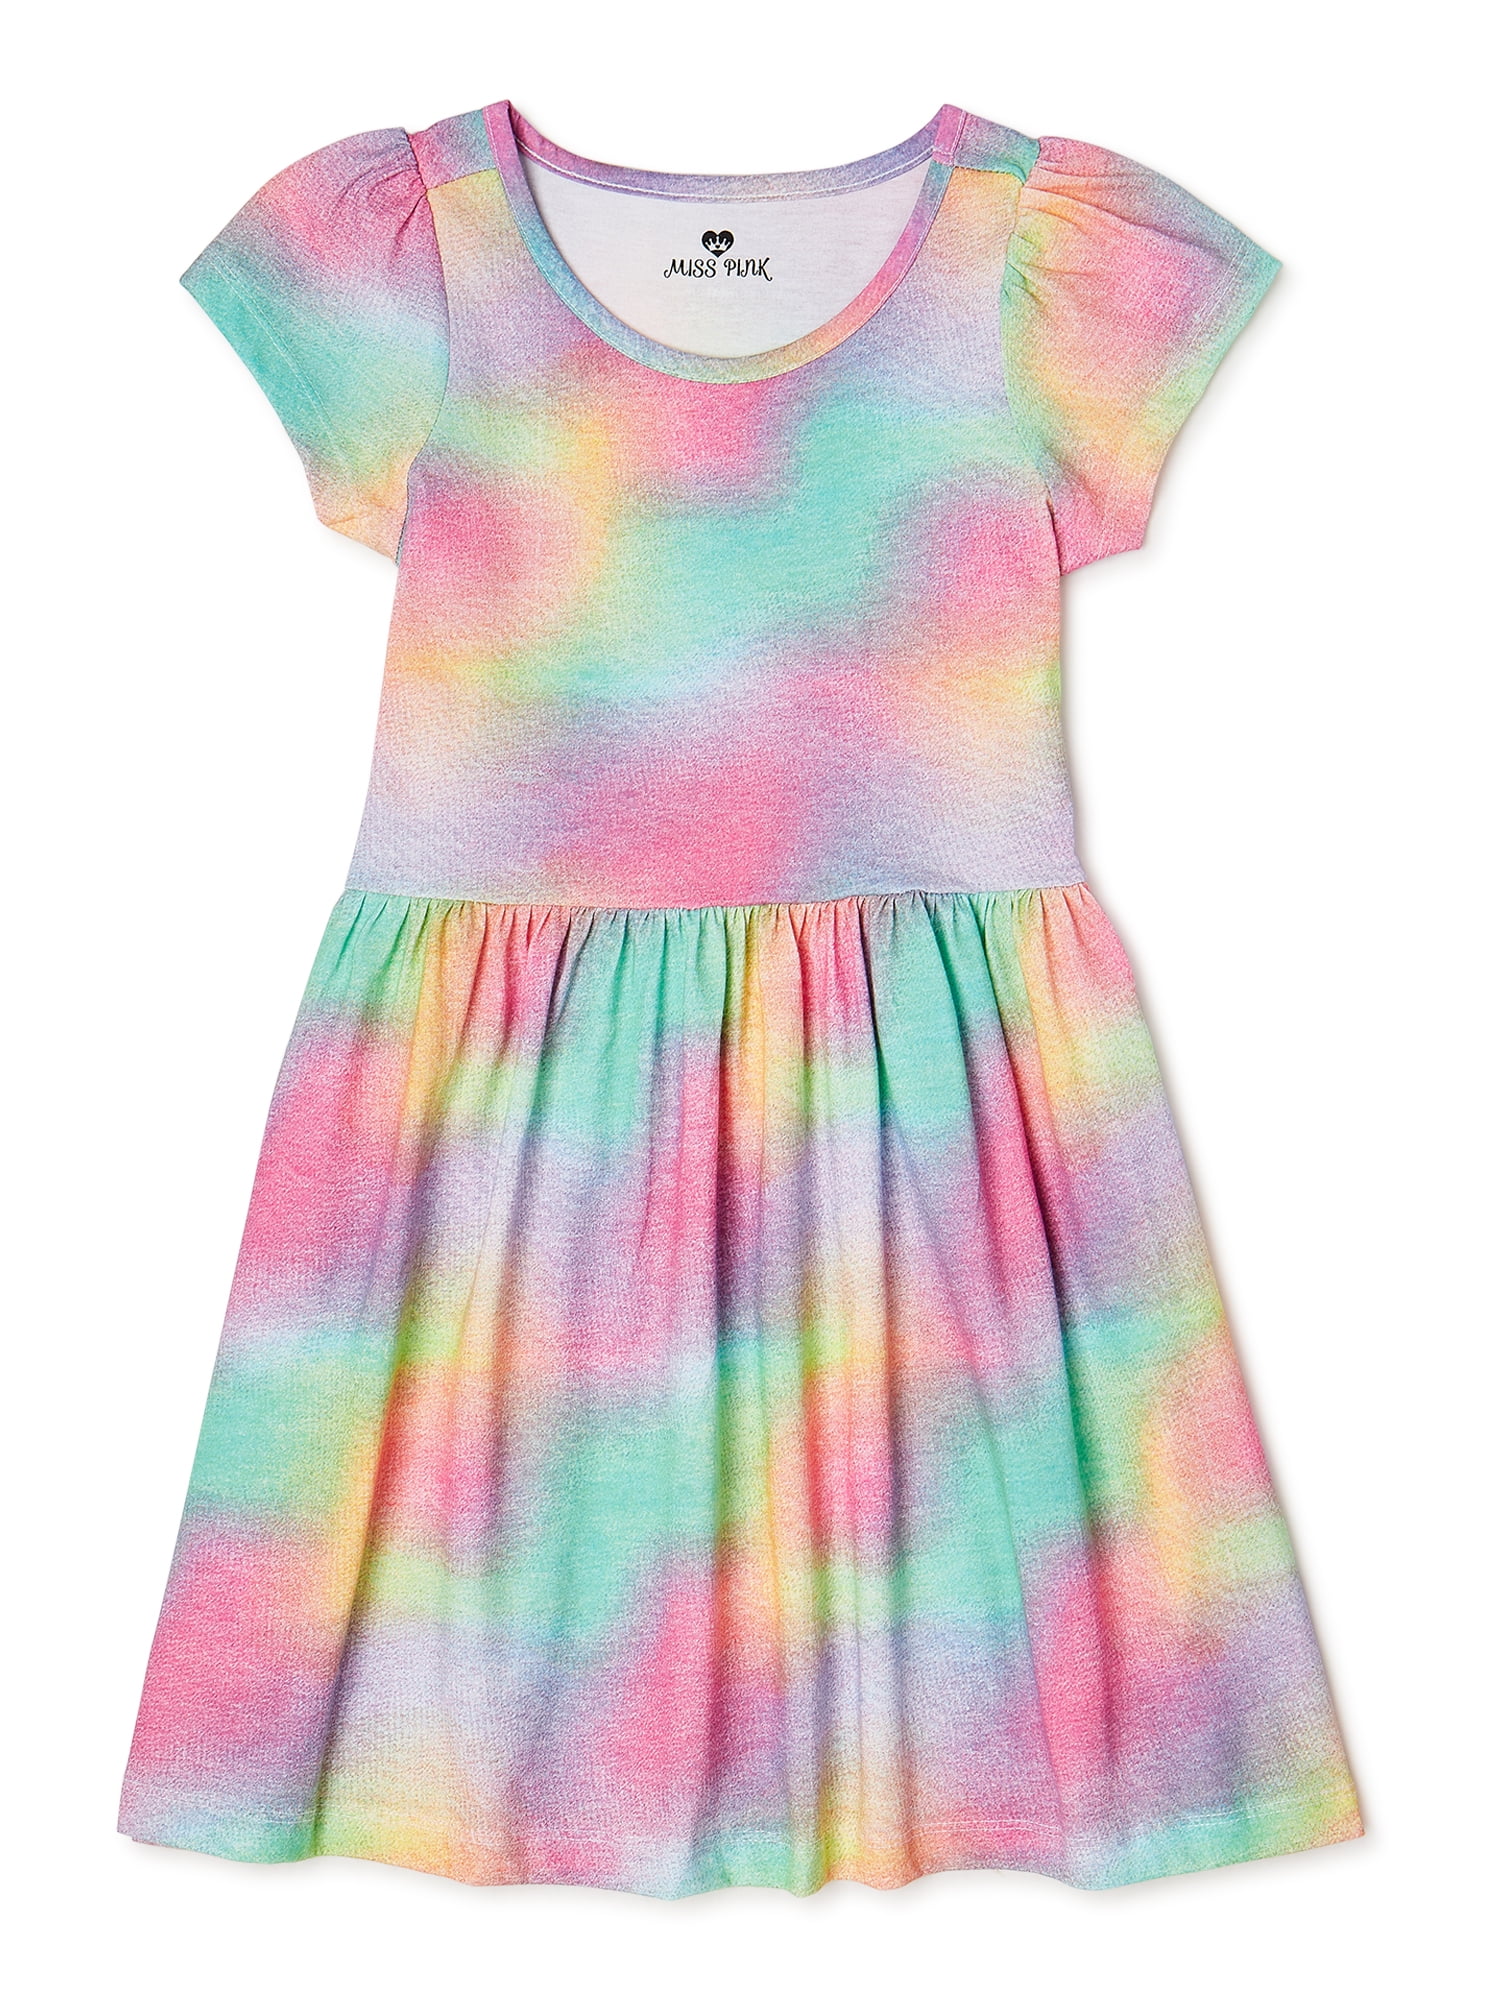 NEXT GIRLS TIE DYED DESIGNED FOR VACAY OR EVERYDAY DRESS 